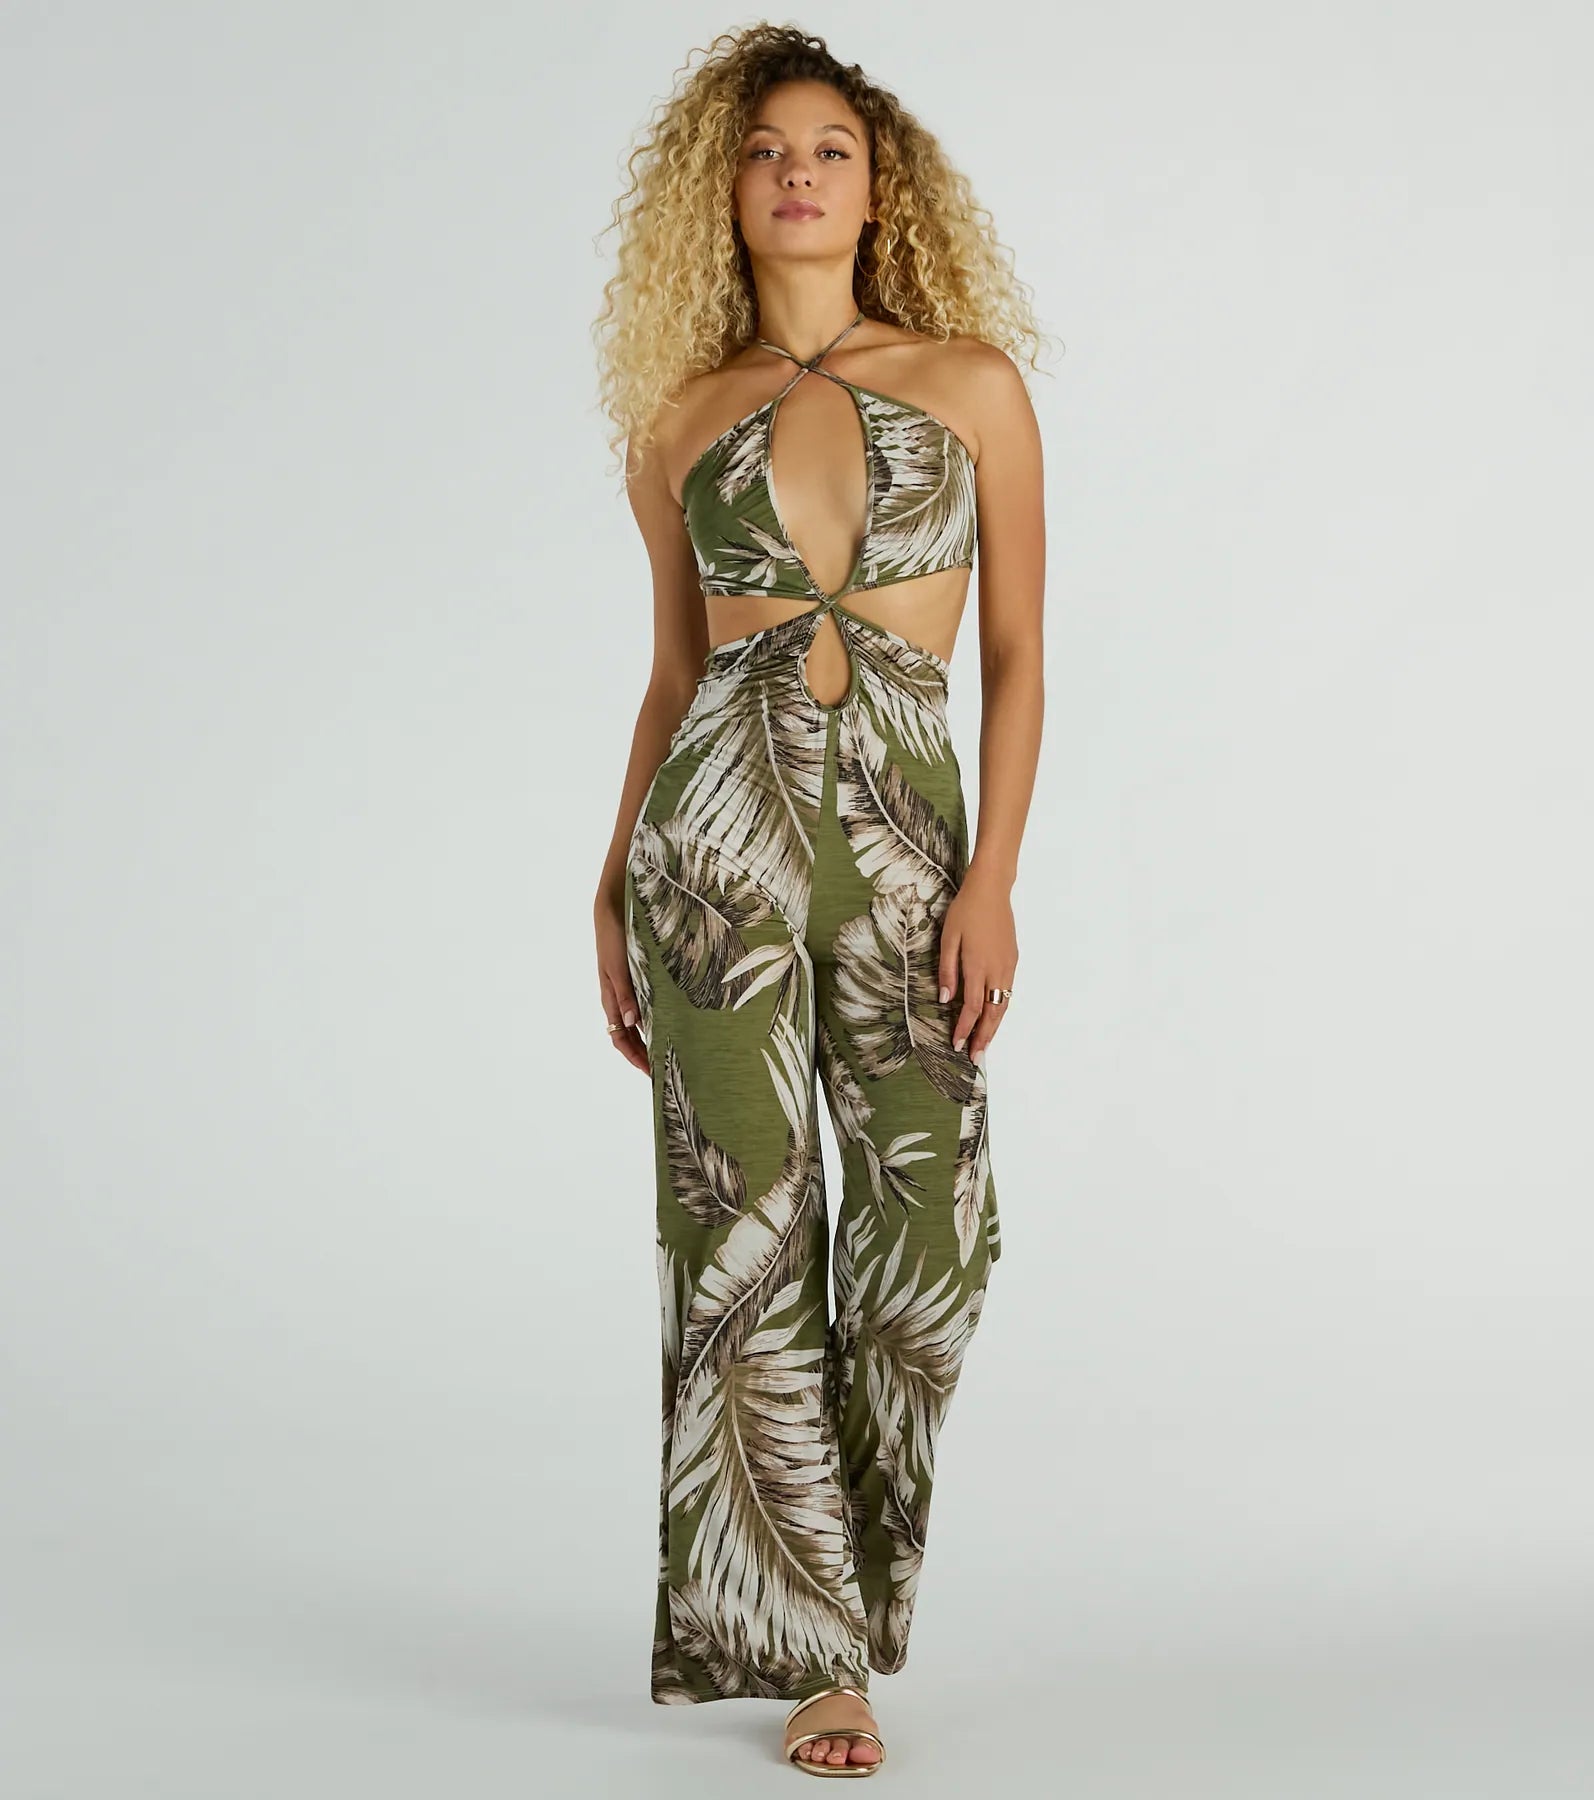 Sexy Knit Tropical Print Sleeveless Spaghetti Strap Stretchy Open-Back Cutout Halter Plunging Neck Jumpsuit